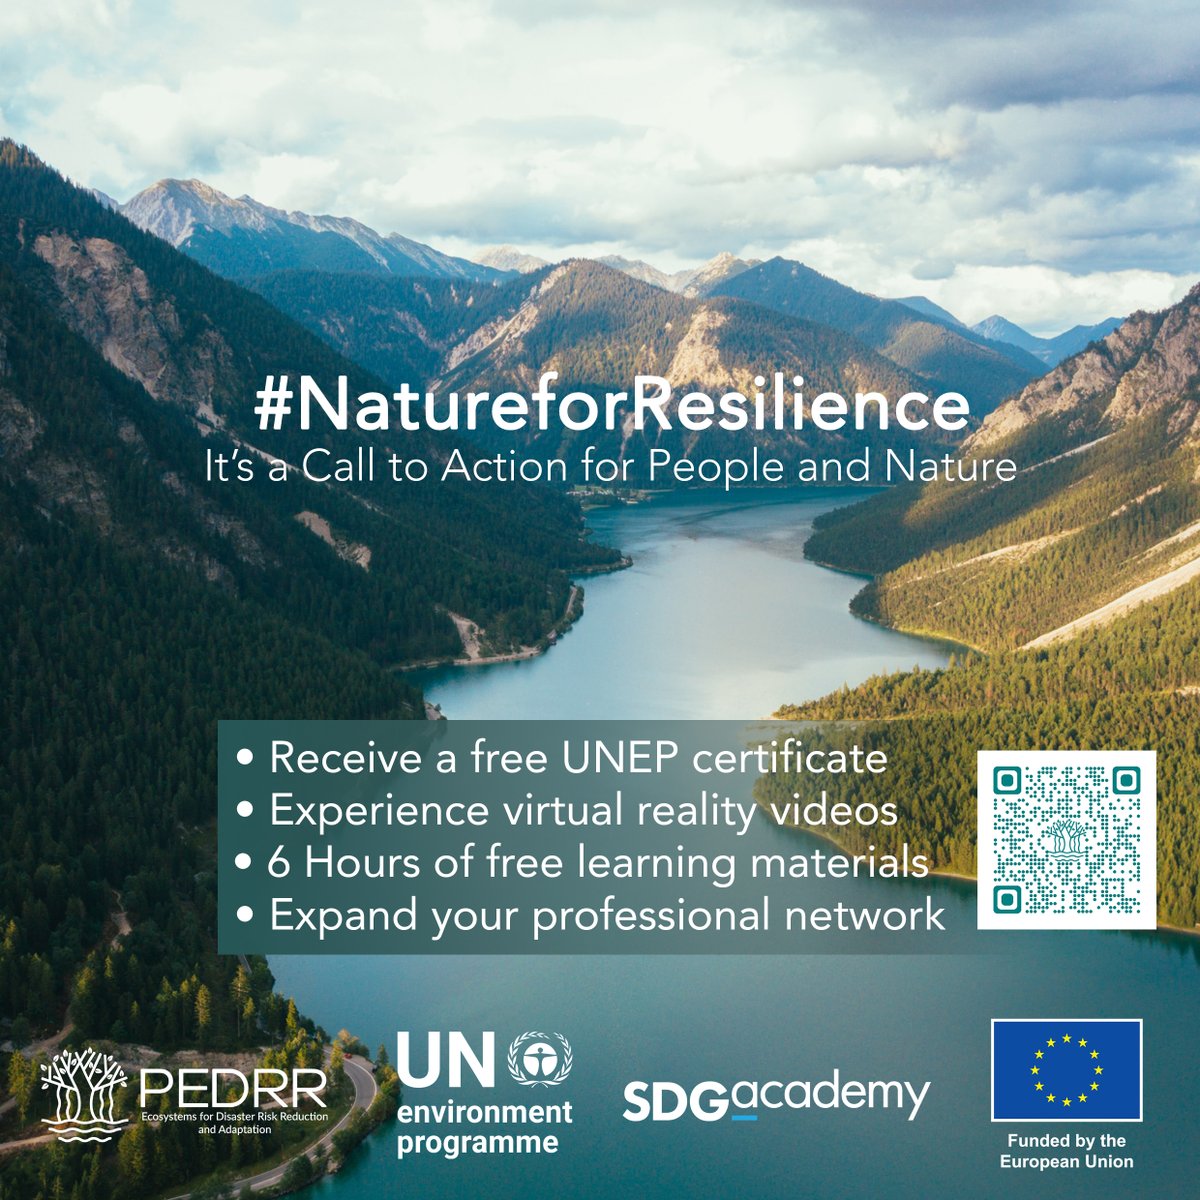 #NaturebasedSolutions for increasing disaster & climate resilience are relevant to everyone 📣
 
Join this free online course developed by @PEDRRnetwork & @UNEP to learn more about how youth can support #NatureforResilience — 8 languages are available 🤩👩‍💻 pedrr.org/MOOC/